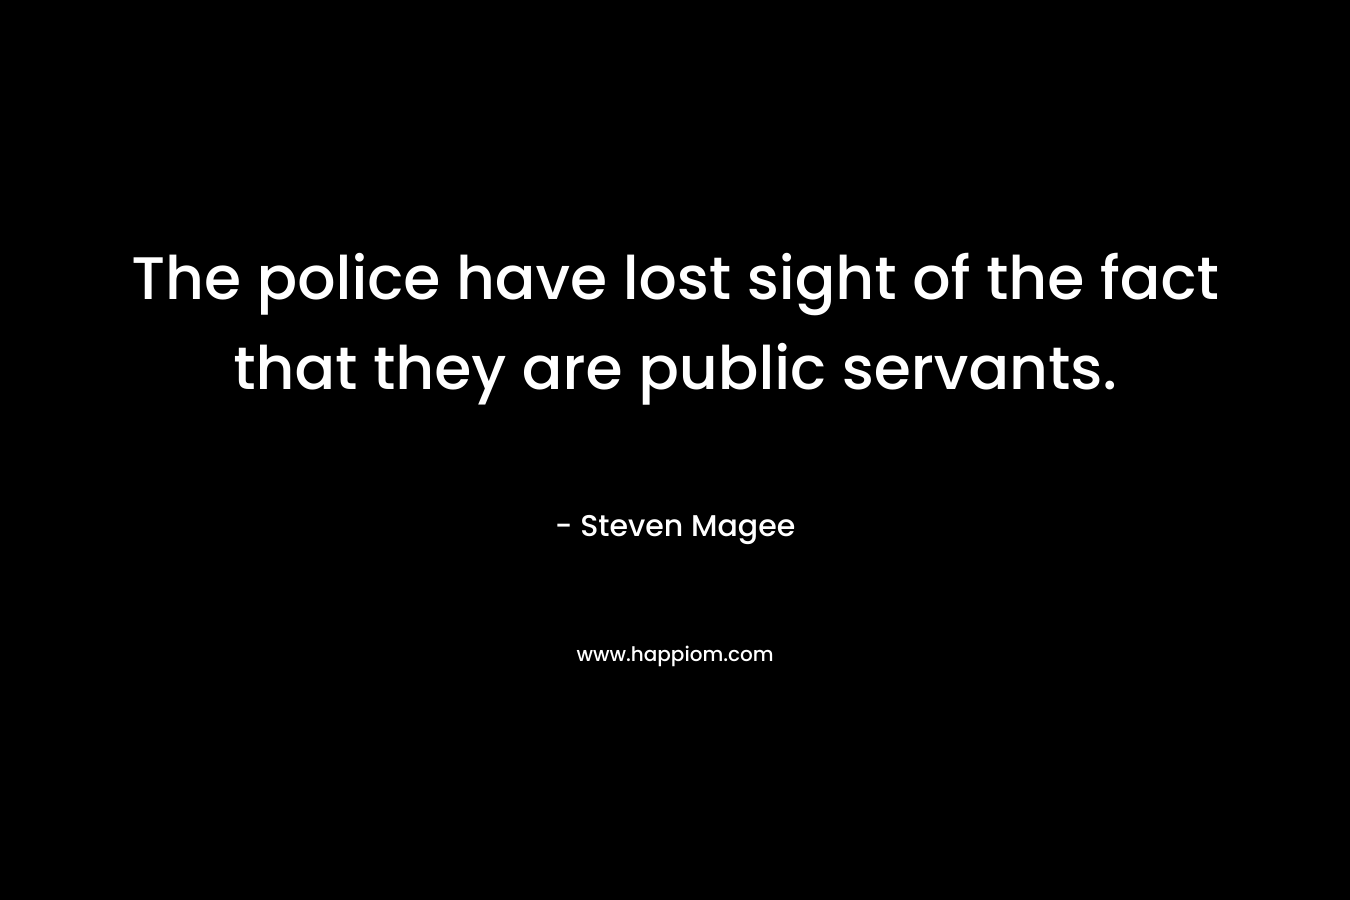 The police have lost sight of the fact that they are public servants. – Steven Magee